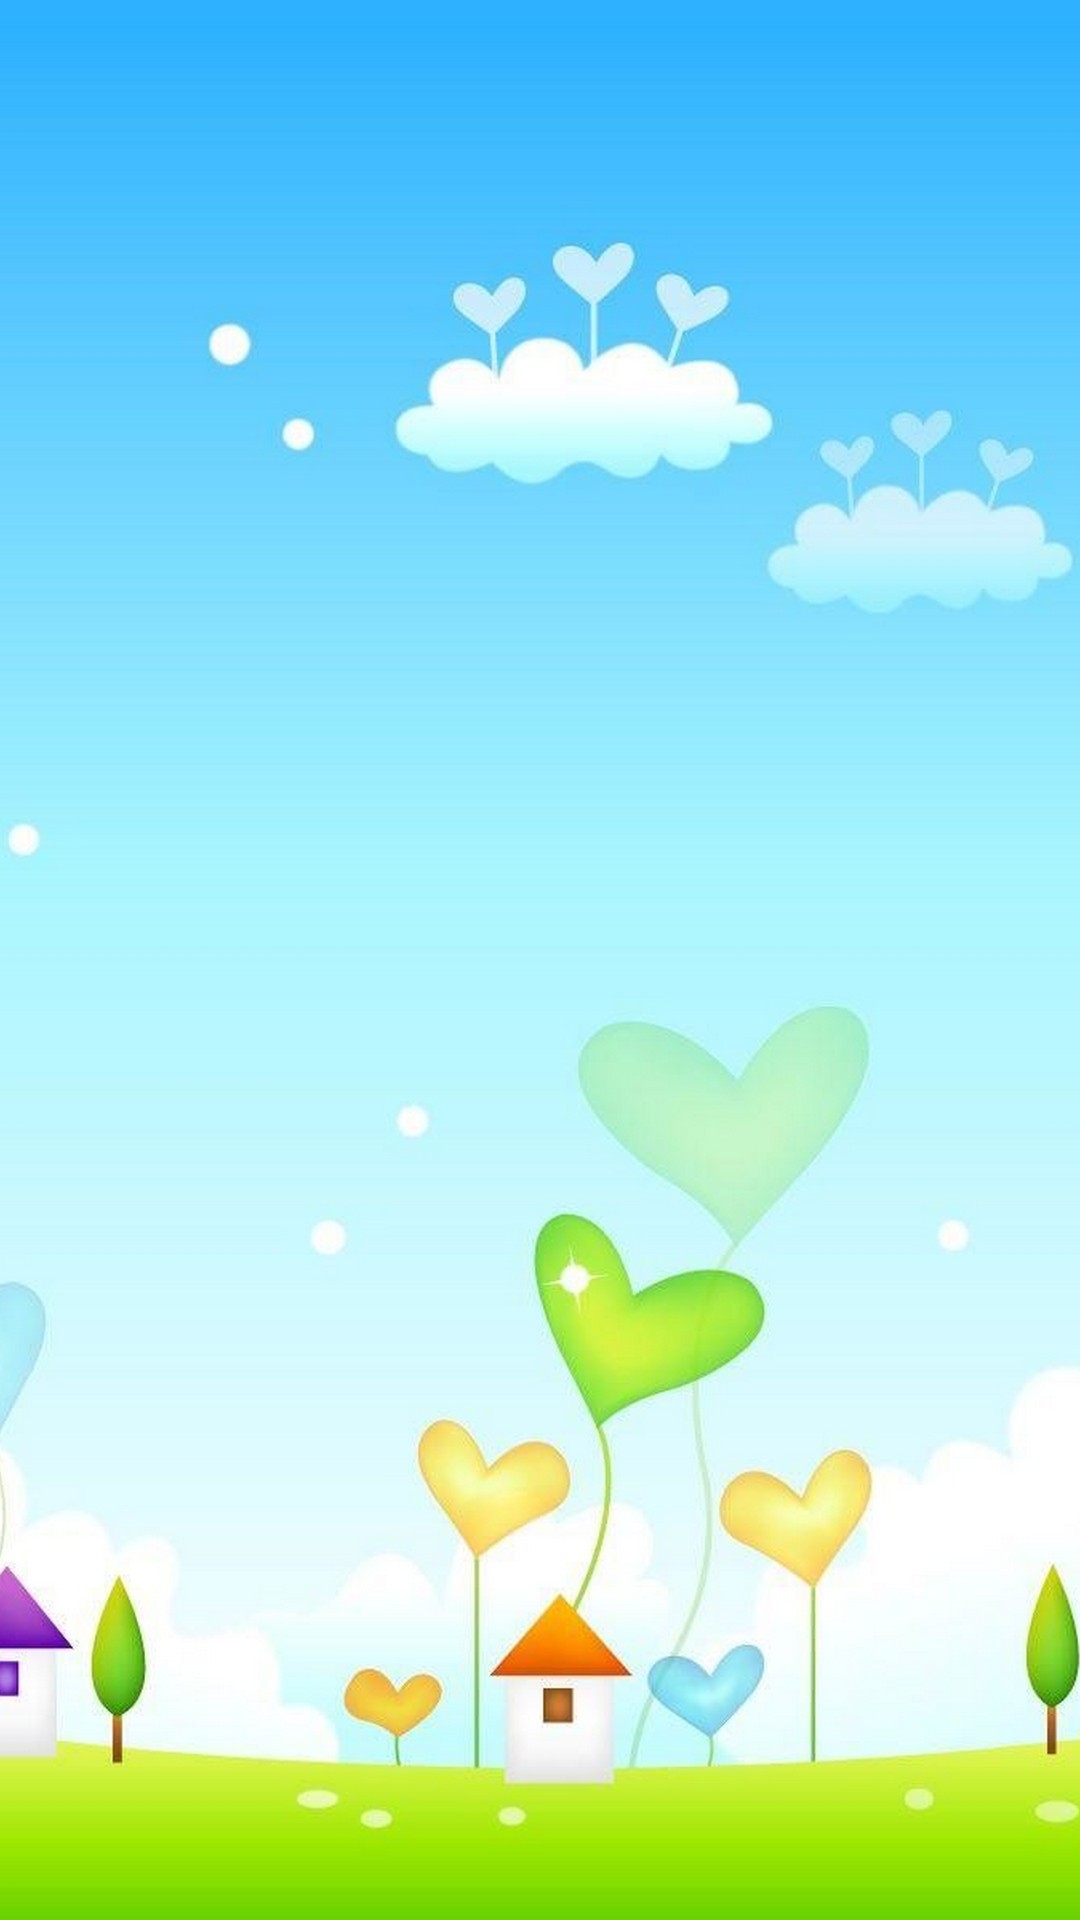 Springtime Backgrounds For Android with HD resolution 1080x1920